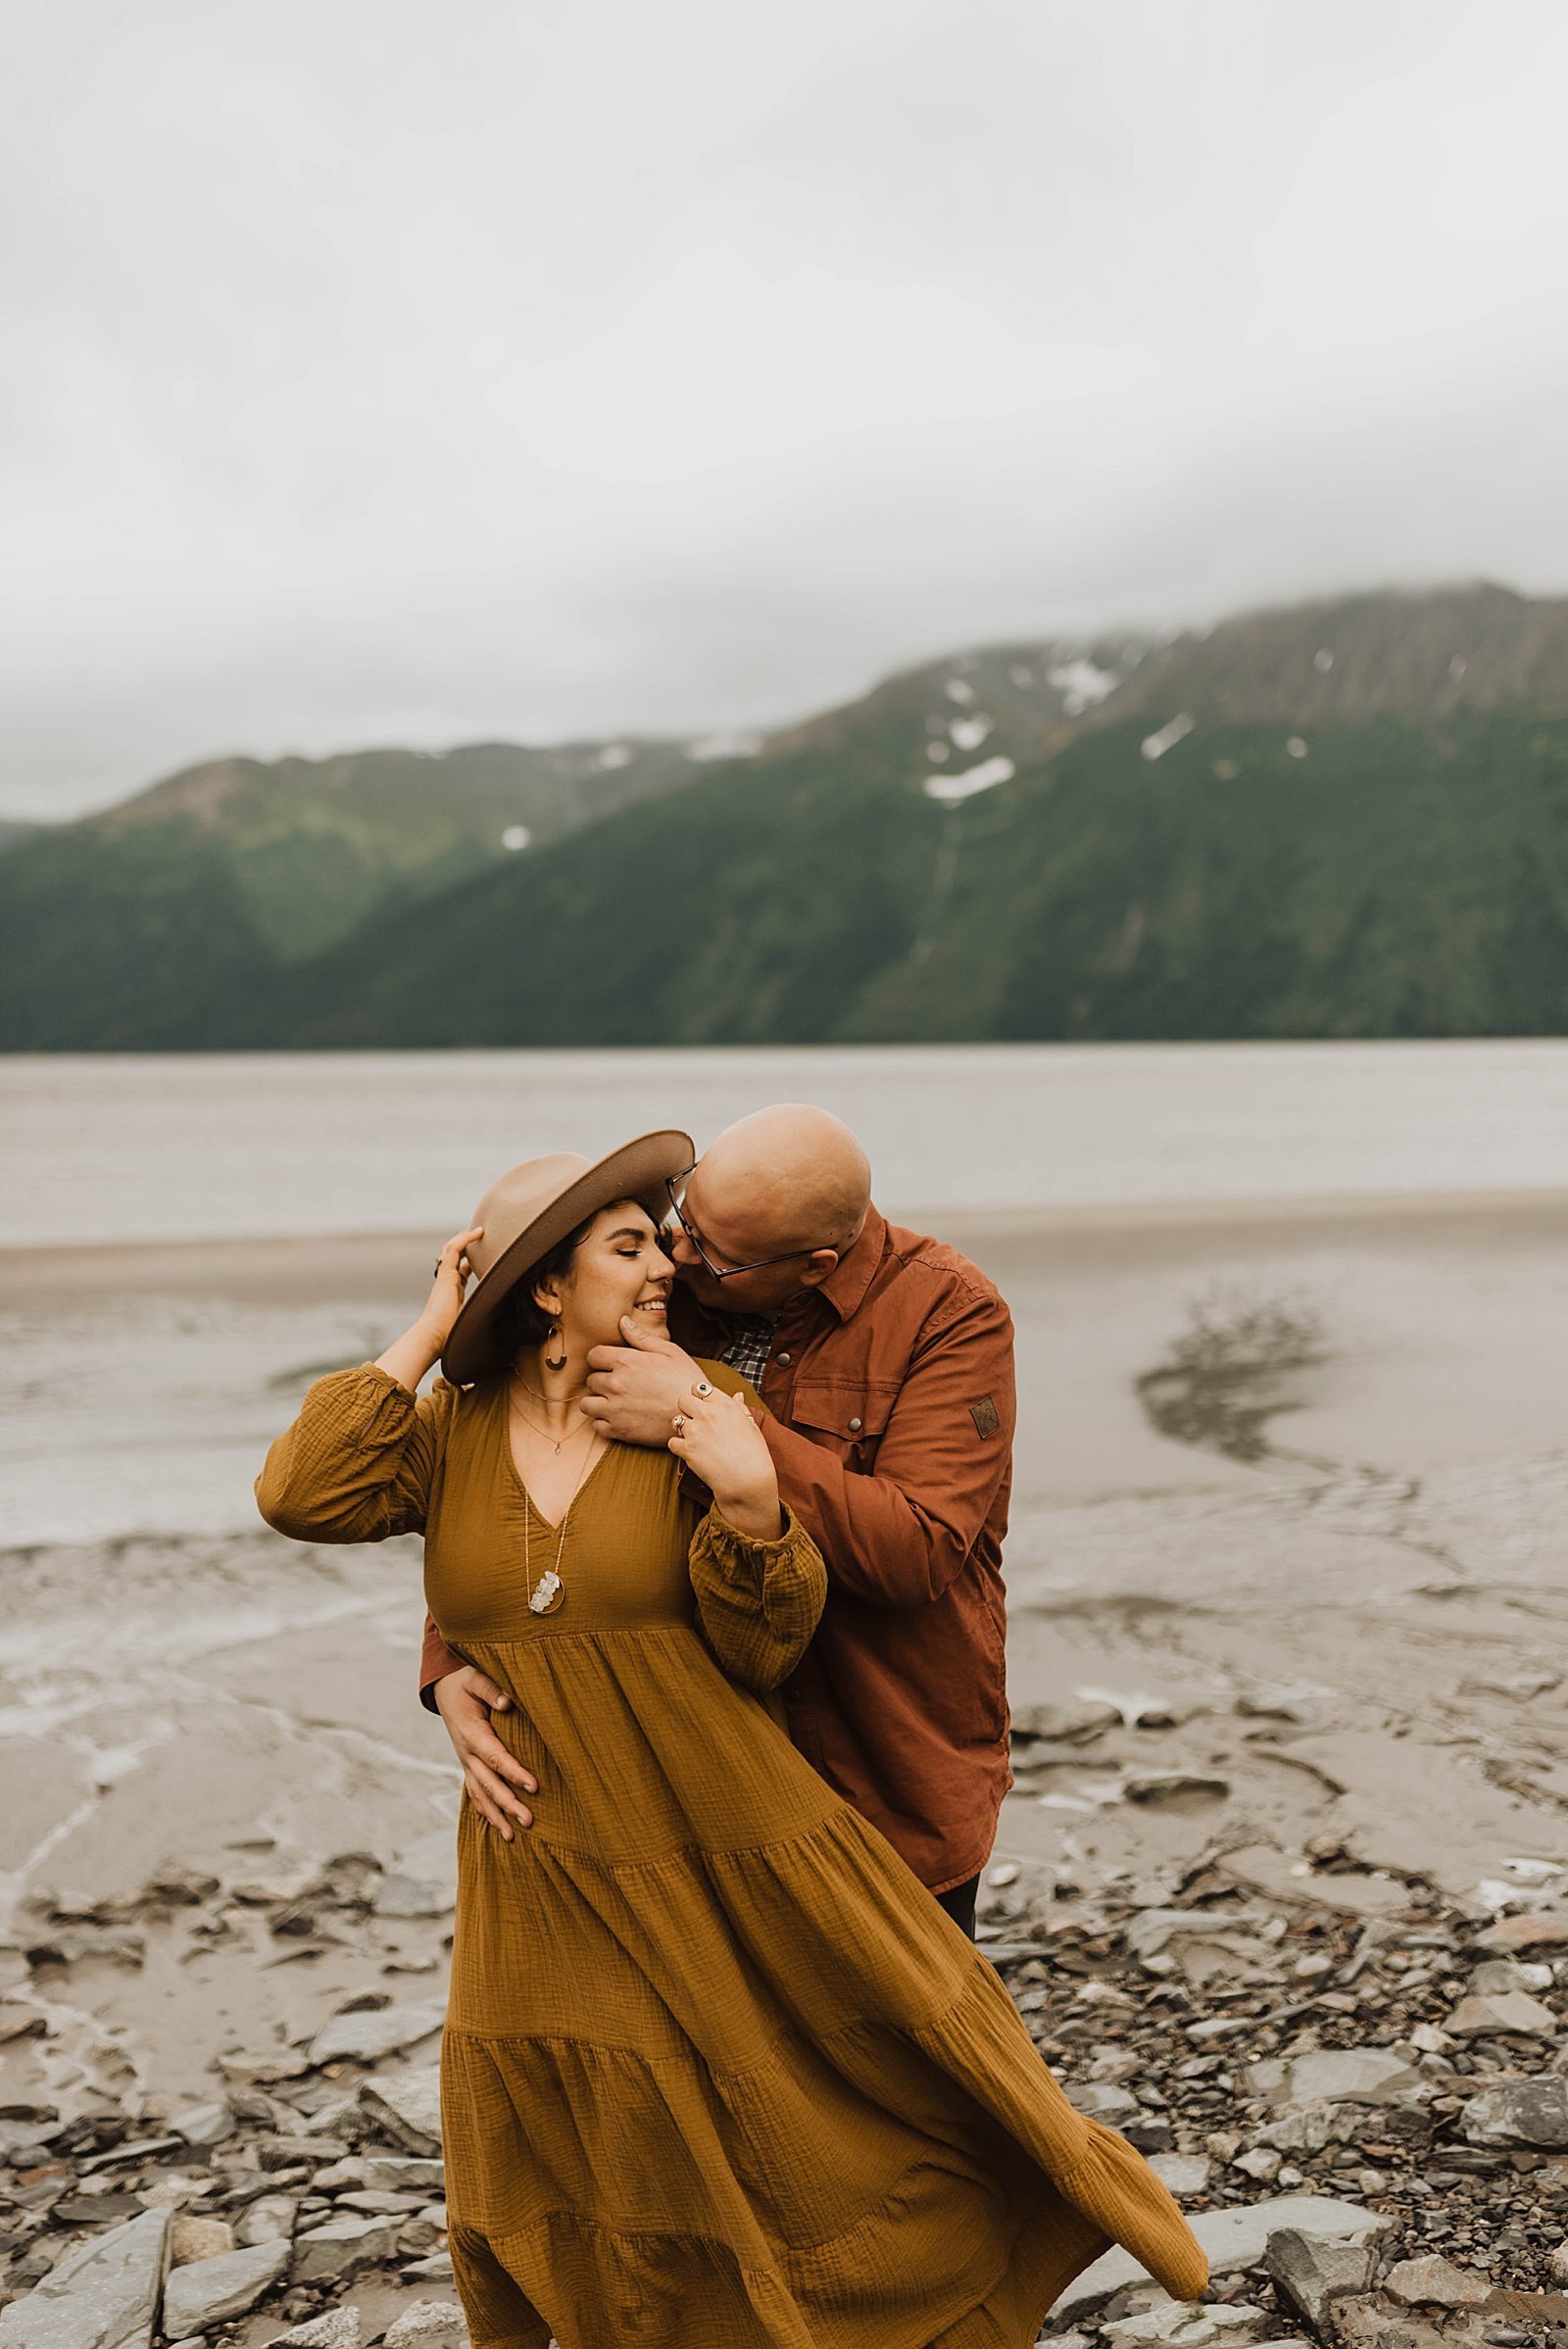  Woman in long orange dress and man in rust shirt kissing for their romantic anniversary session 